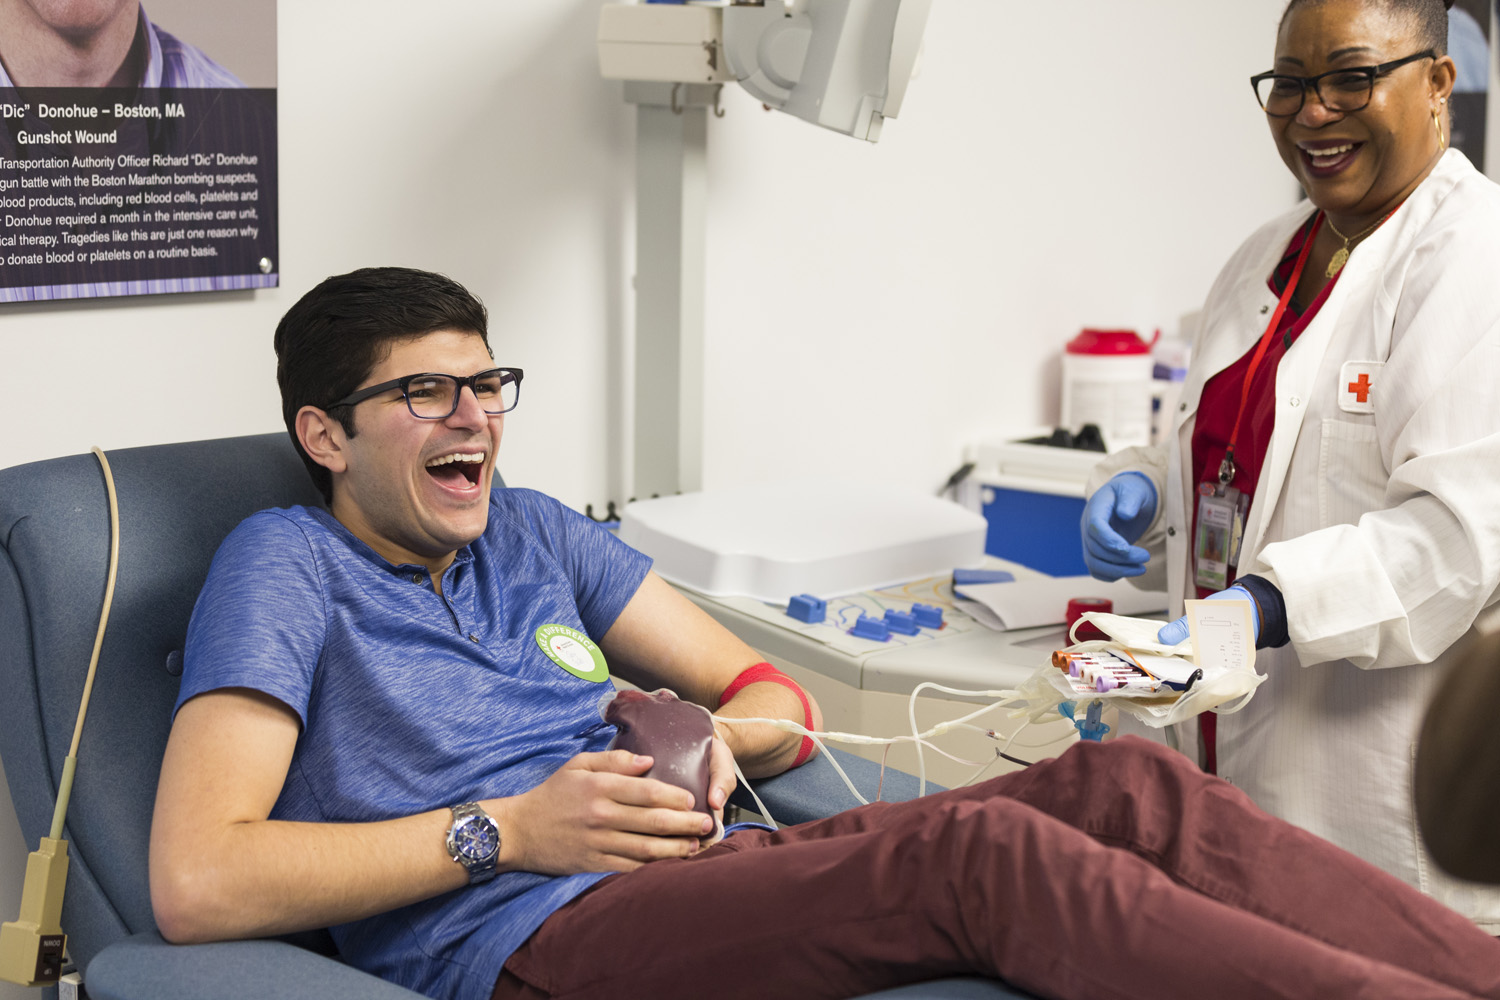 Jay Franzone laughs as he donates blood in Washington, D.C. (Tamzin B. Smith Portrait Photography)